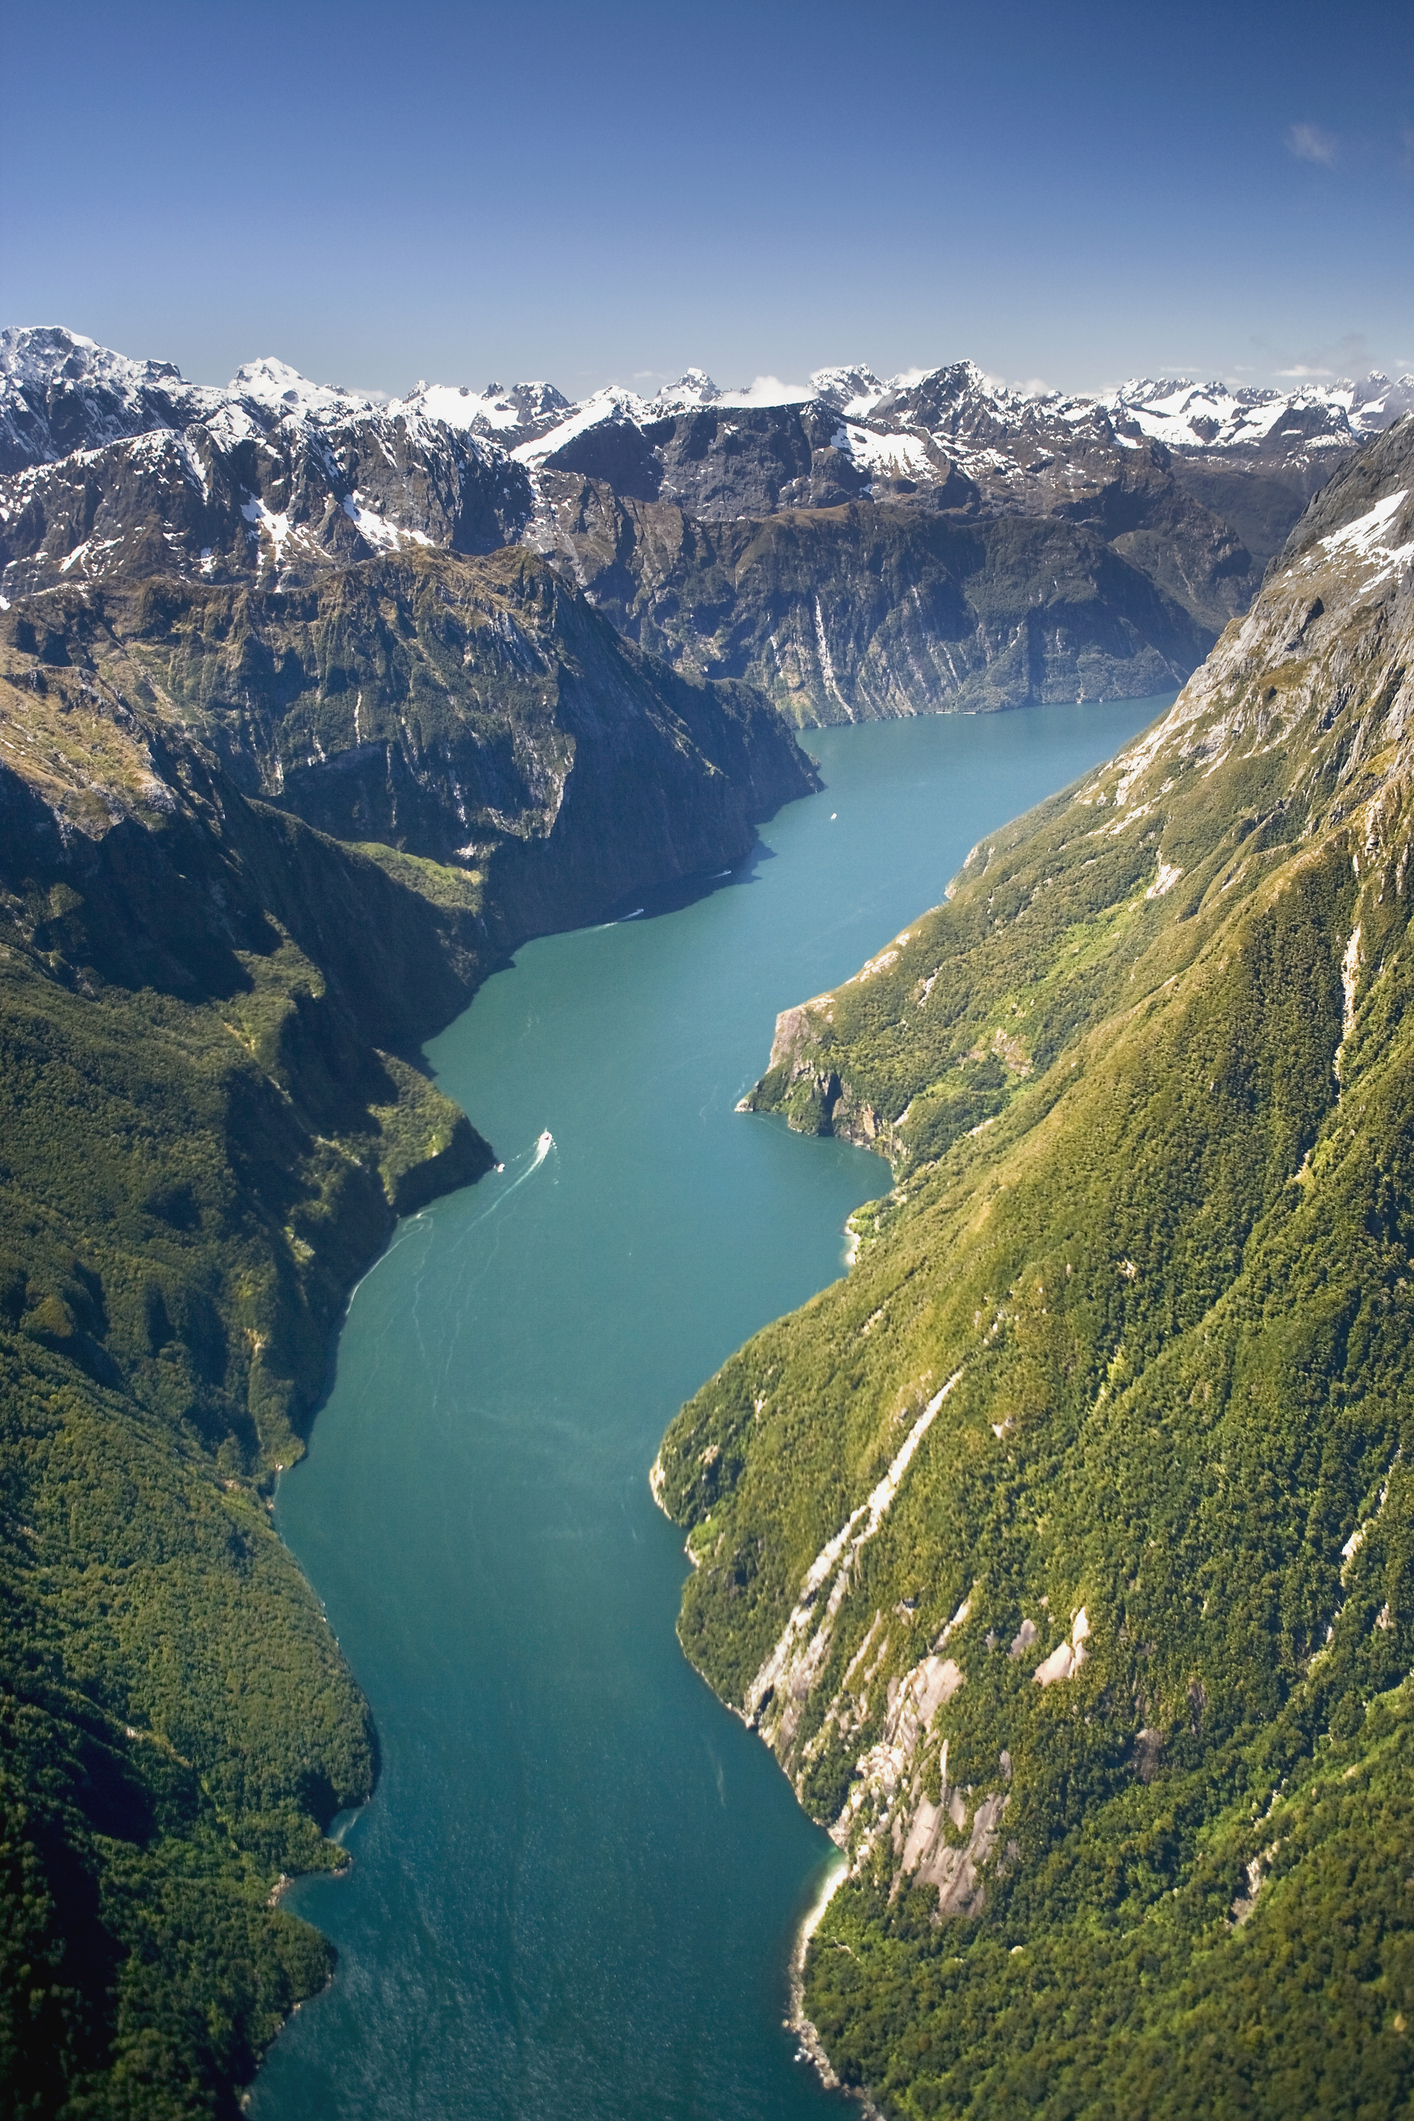 Aerial view of a fjord with steep cliffs and snowy mountain peaks